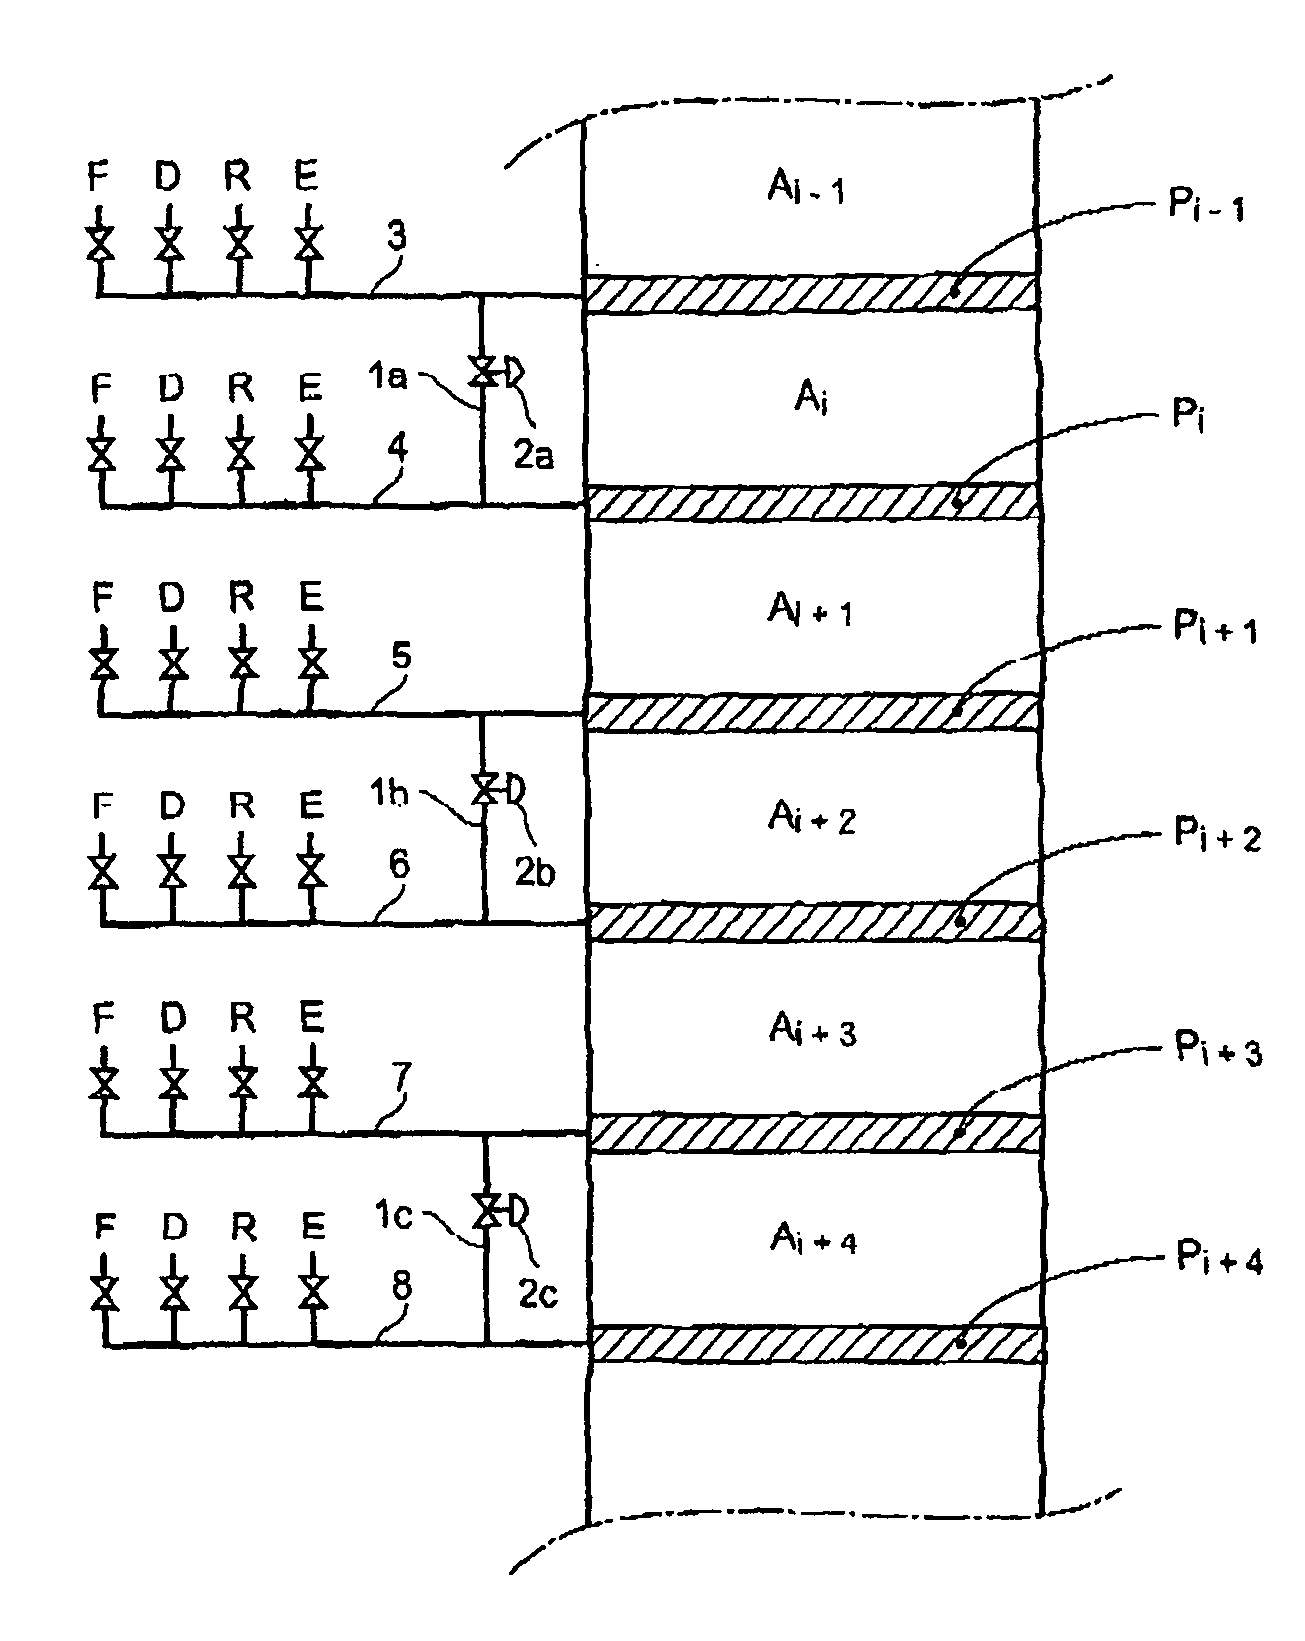 Process and device for simulated moving bed separation with a reduced number of valves and lines